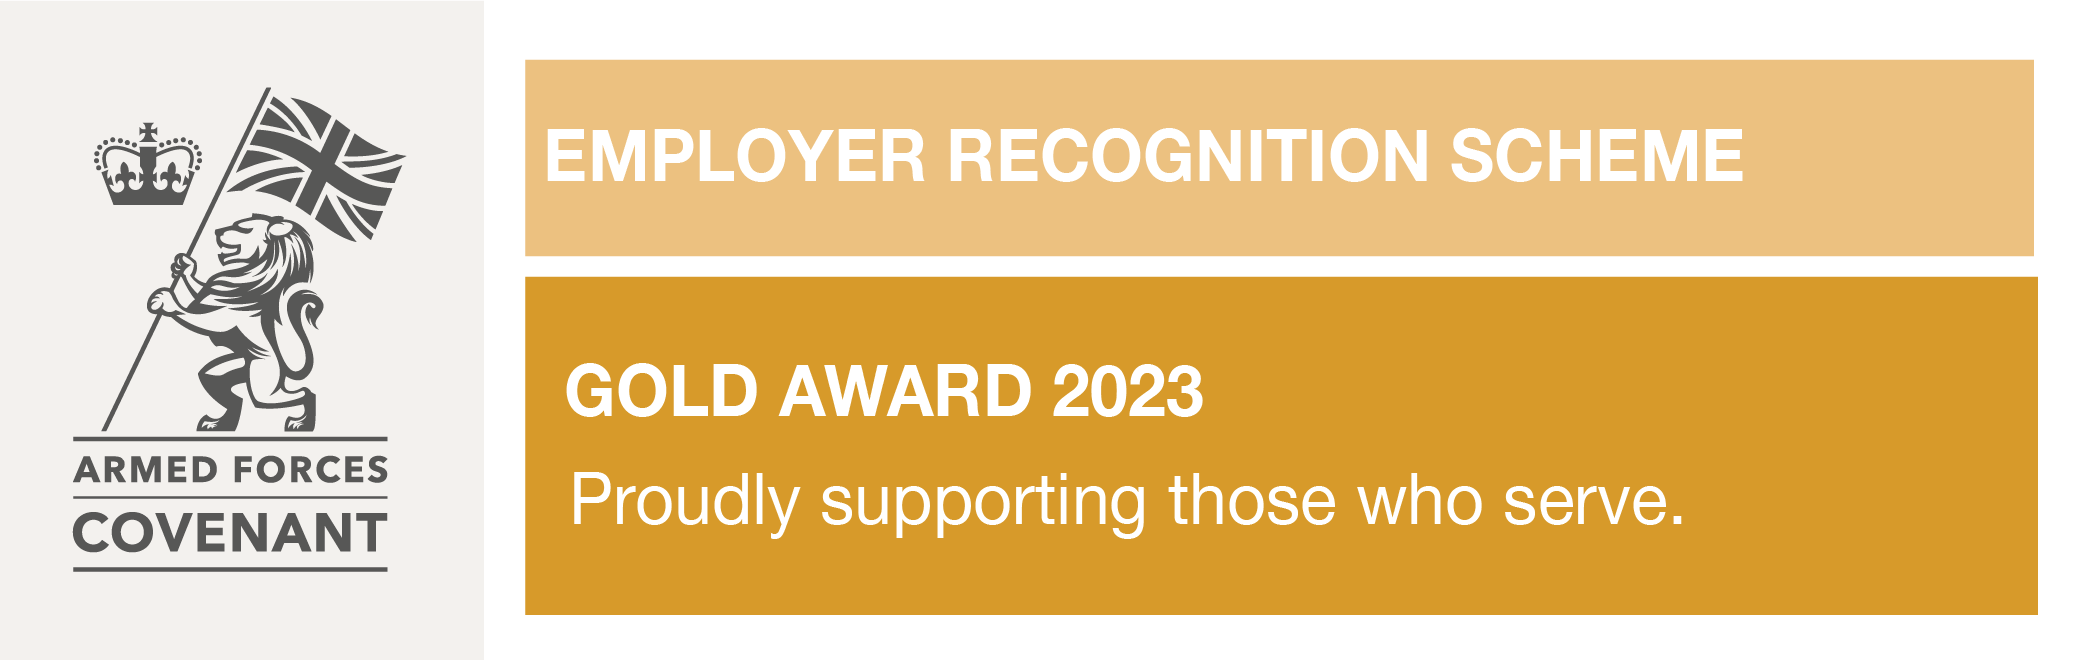 Trust given national employer gold award for supporting armed forces